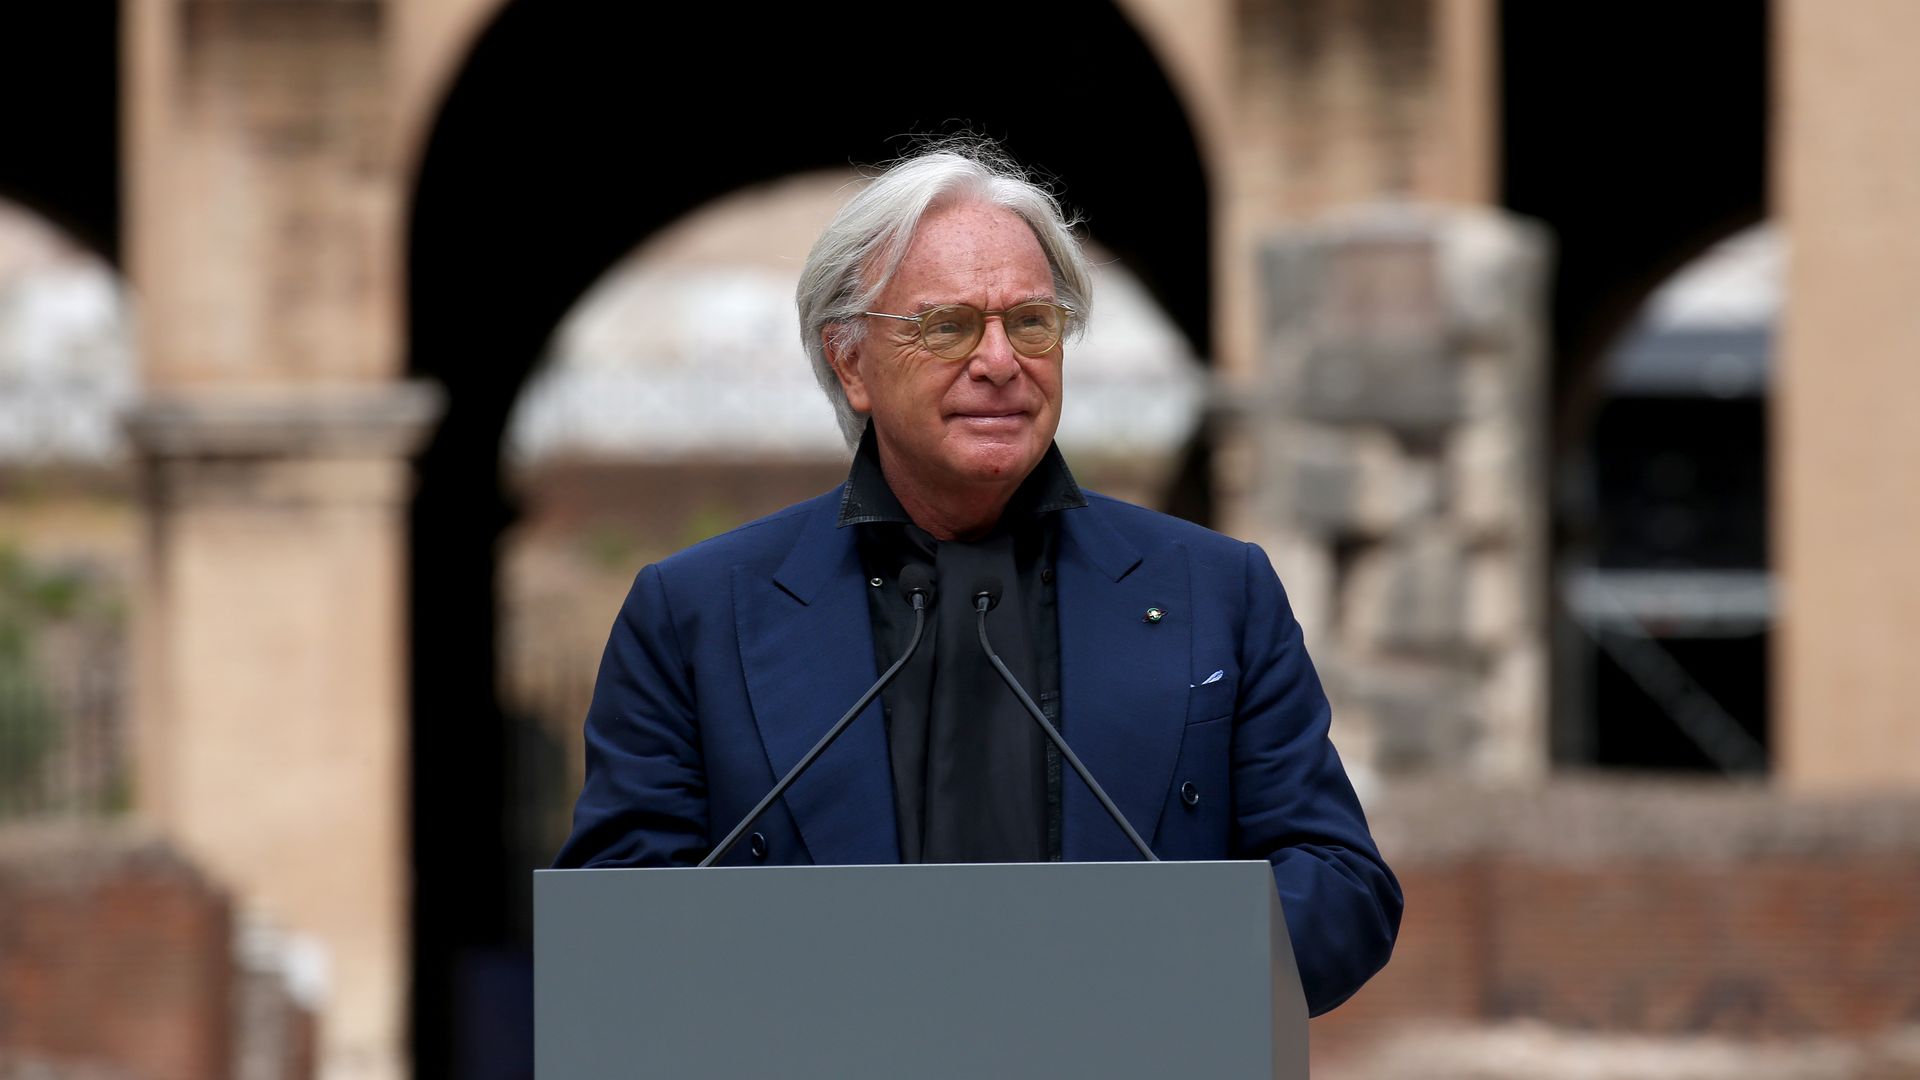 2021 photo of Diego Della Valle, Tod’s chair